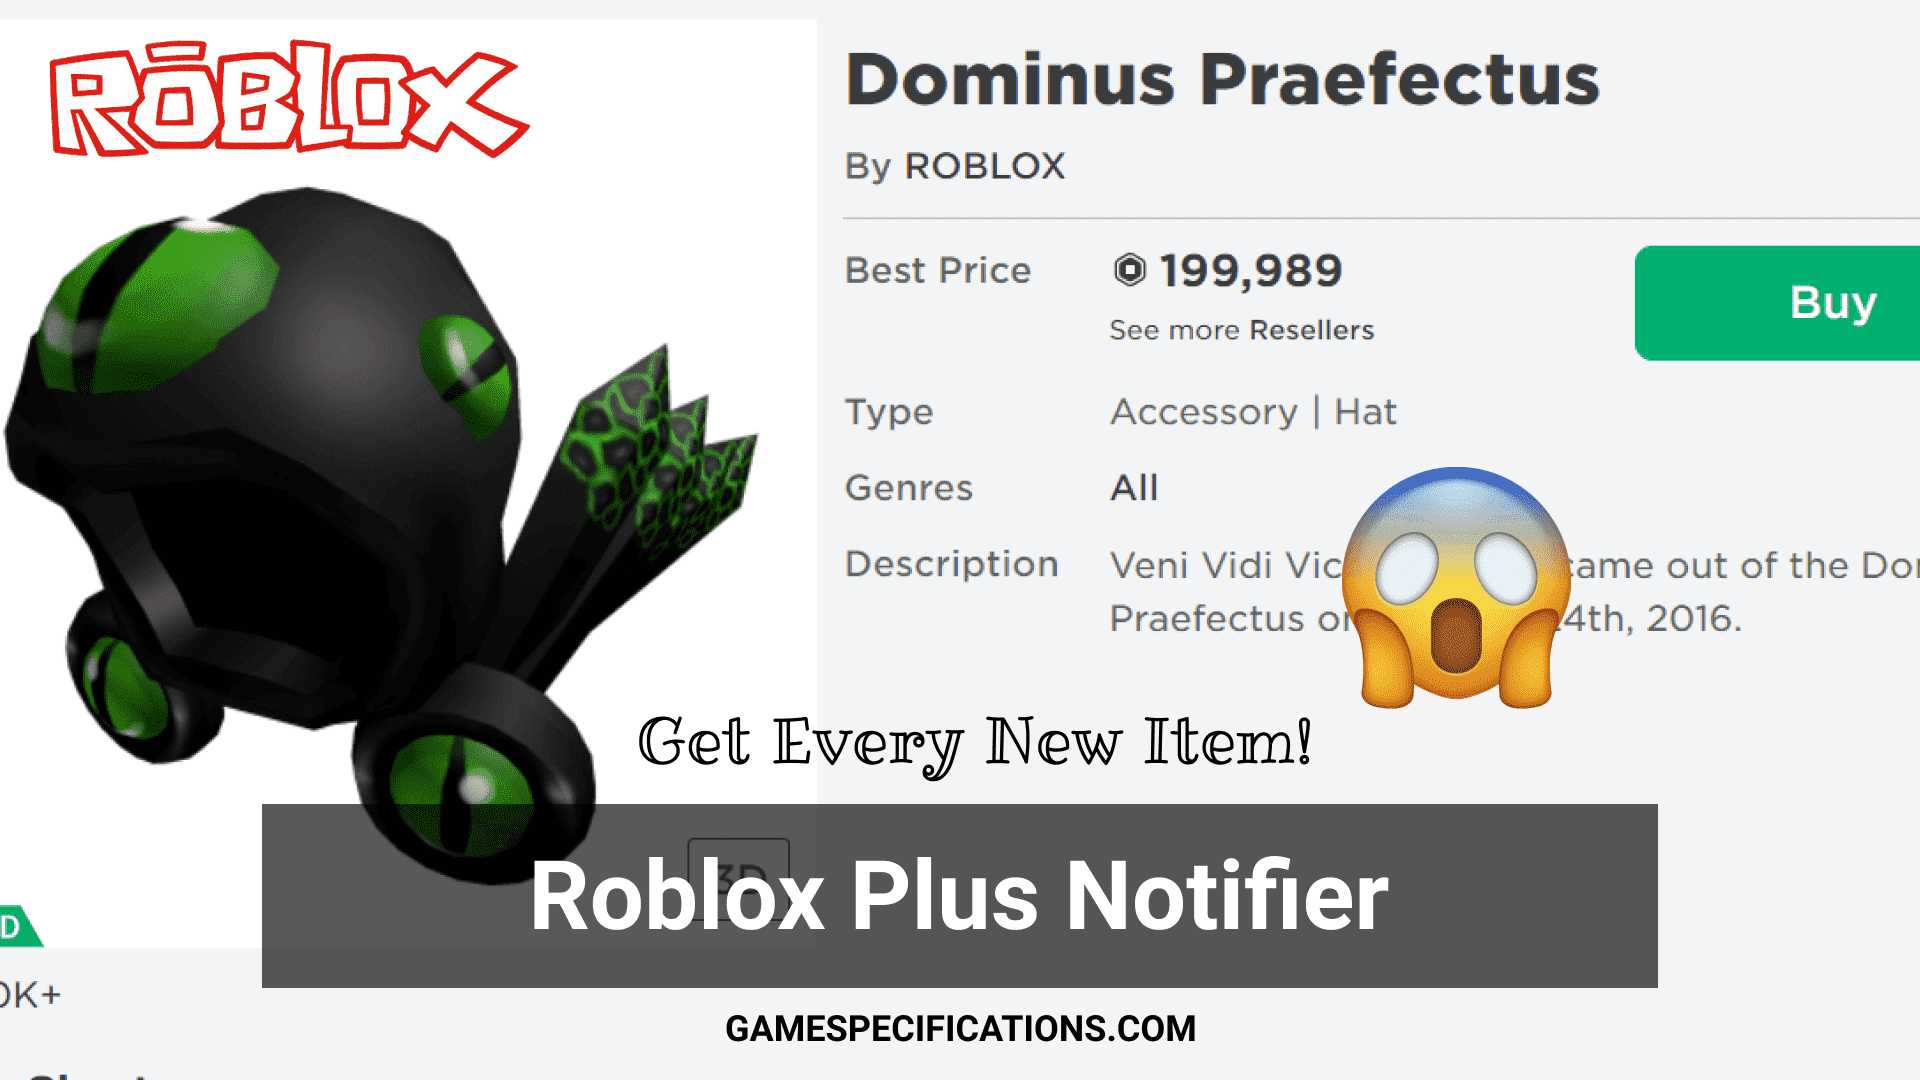 How To Use Roblox Plus Notifier To Get The Catalogue Items First 2021 Game Specifications - how to fix no sound on roblox